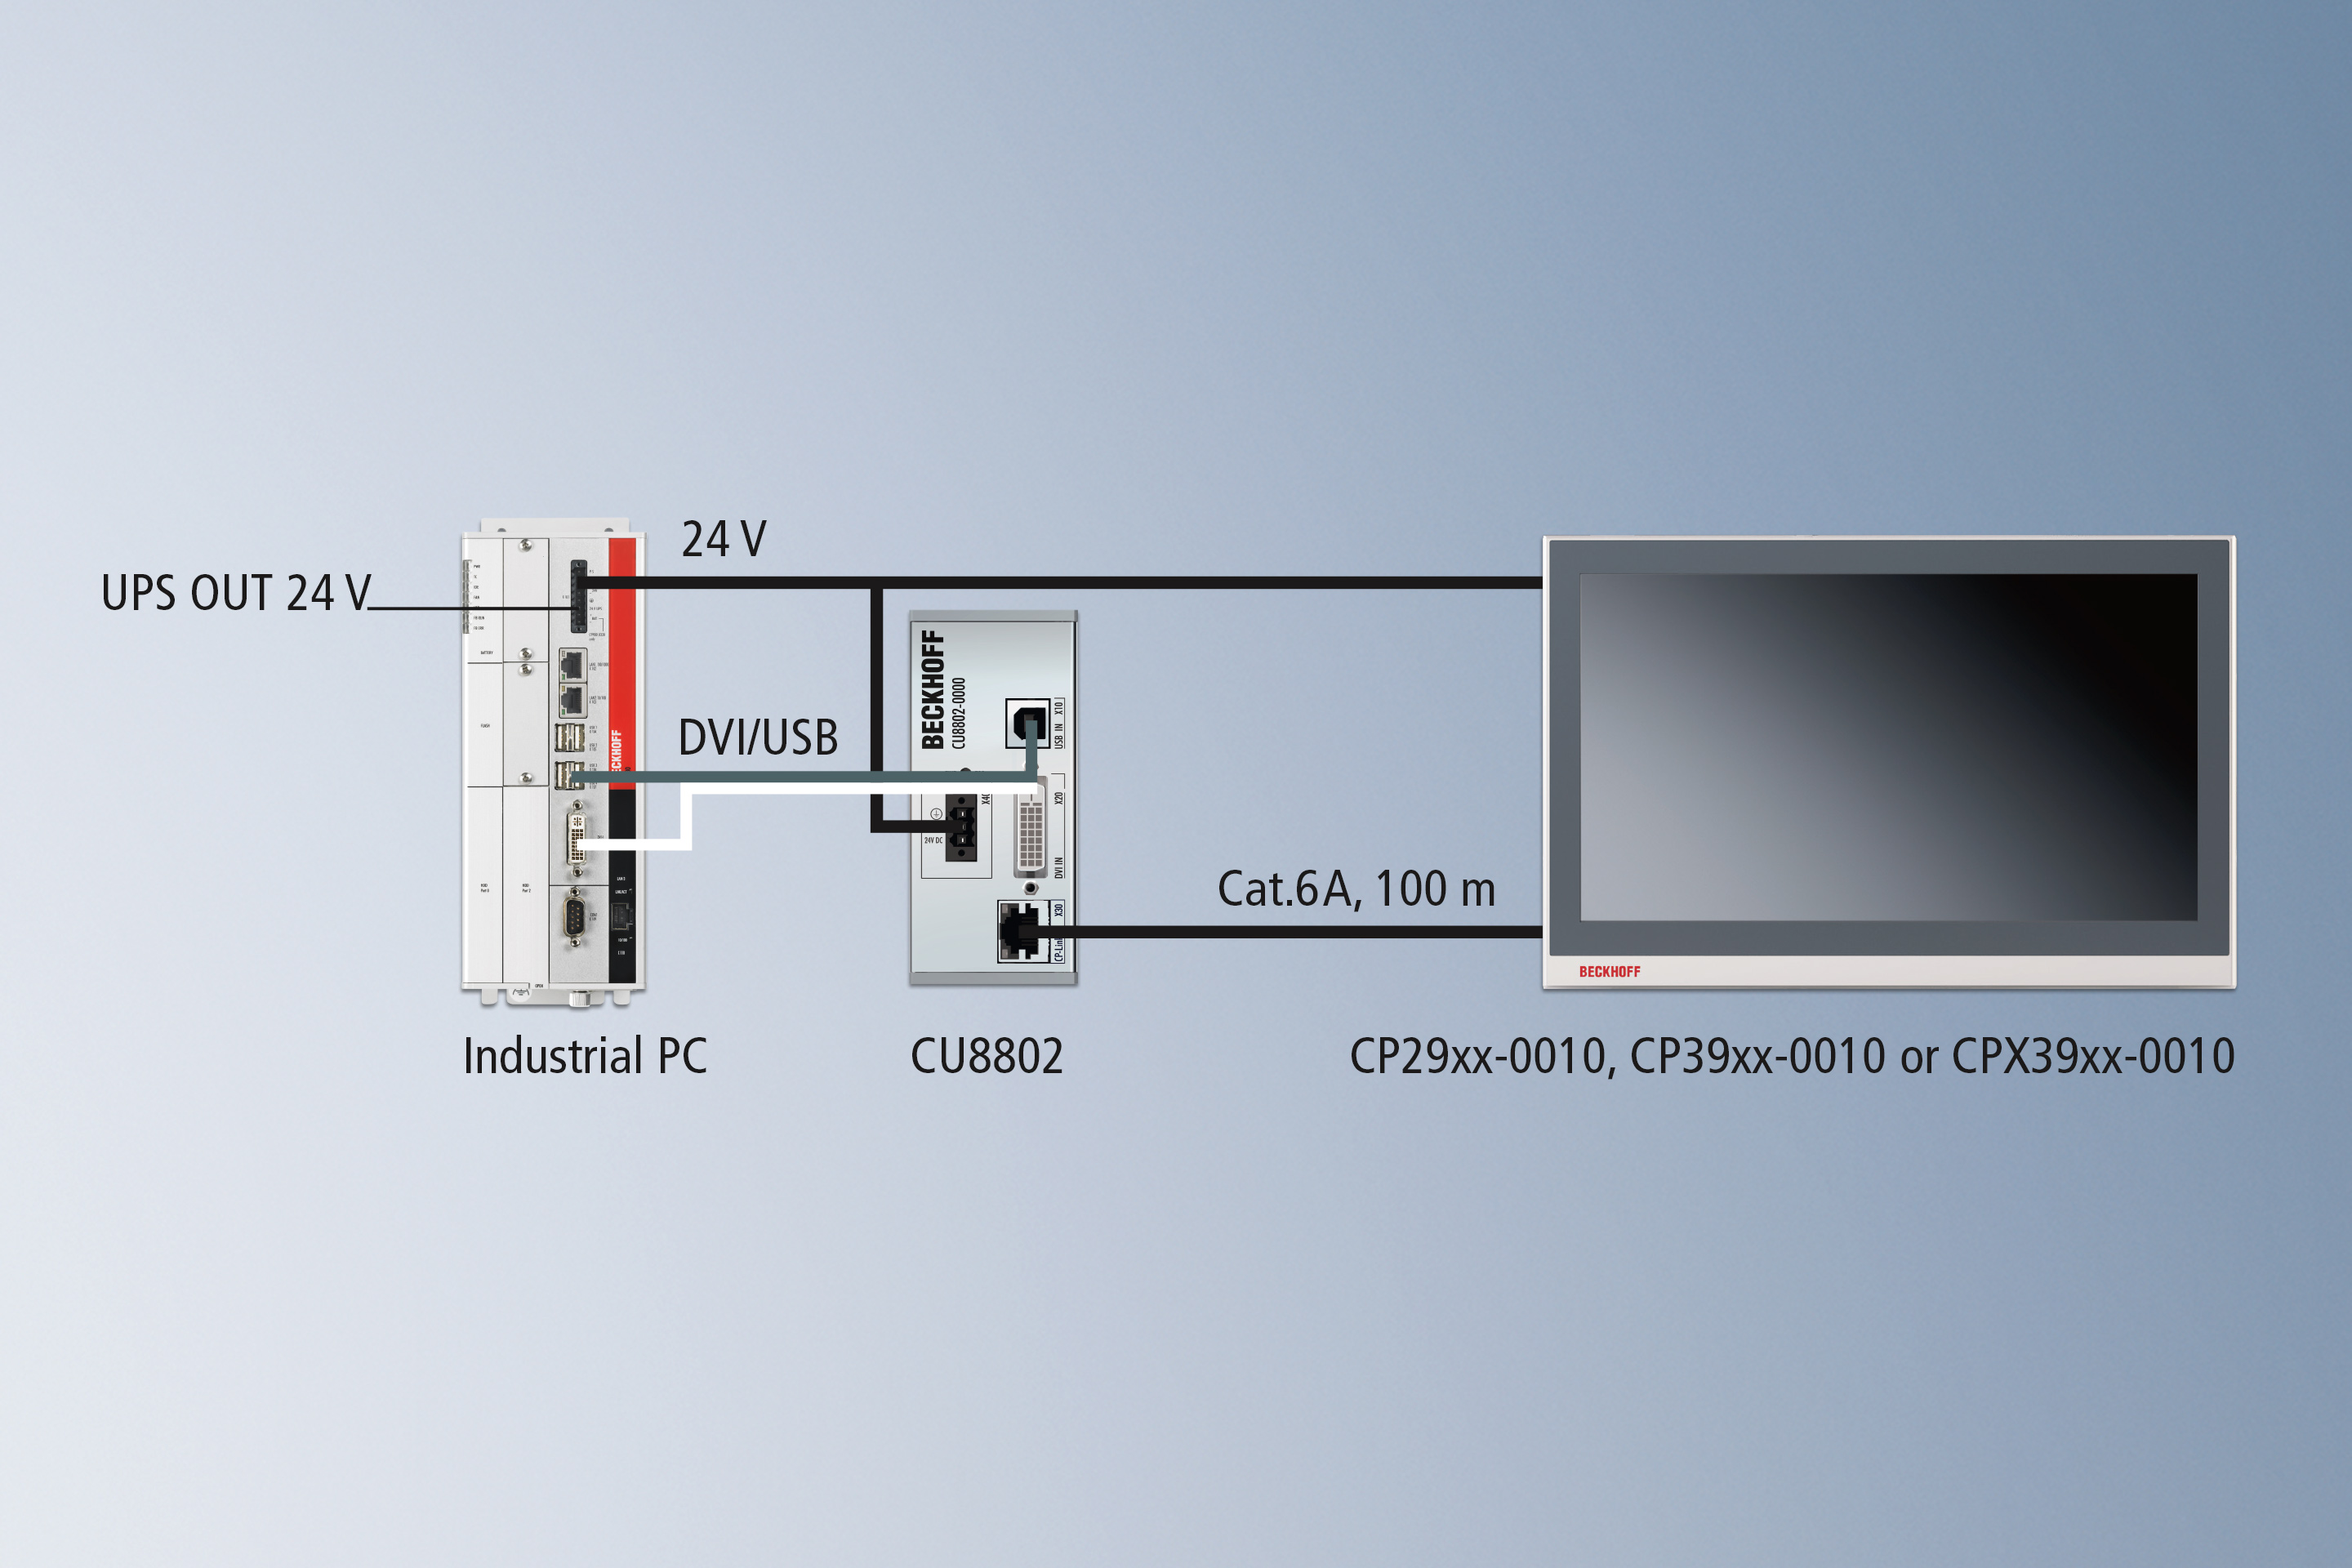 CP-Link 4 – The Two Cable Display Link: via CU8802 transmitter box 